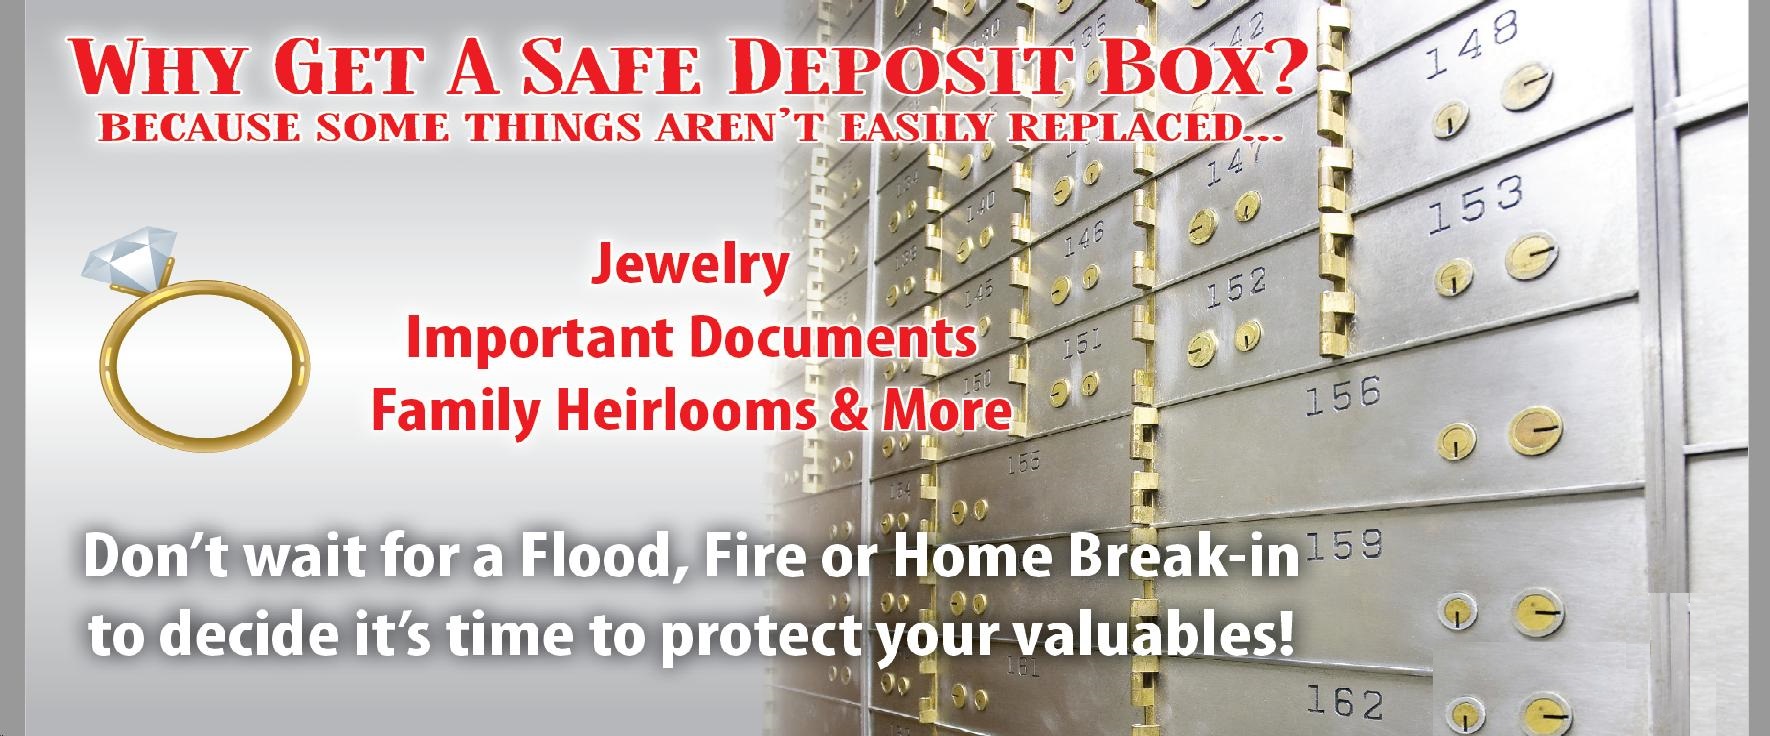 Why have a safe deposit box?